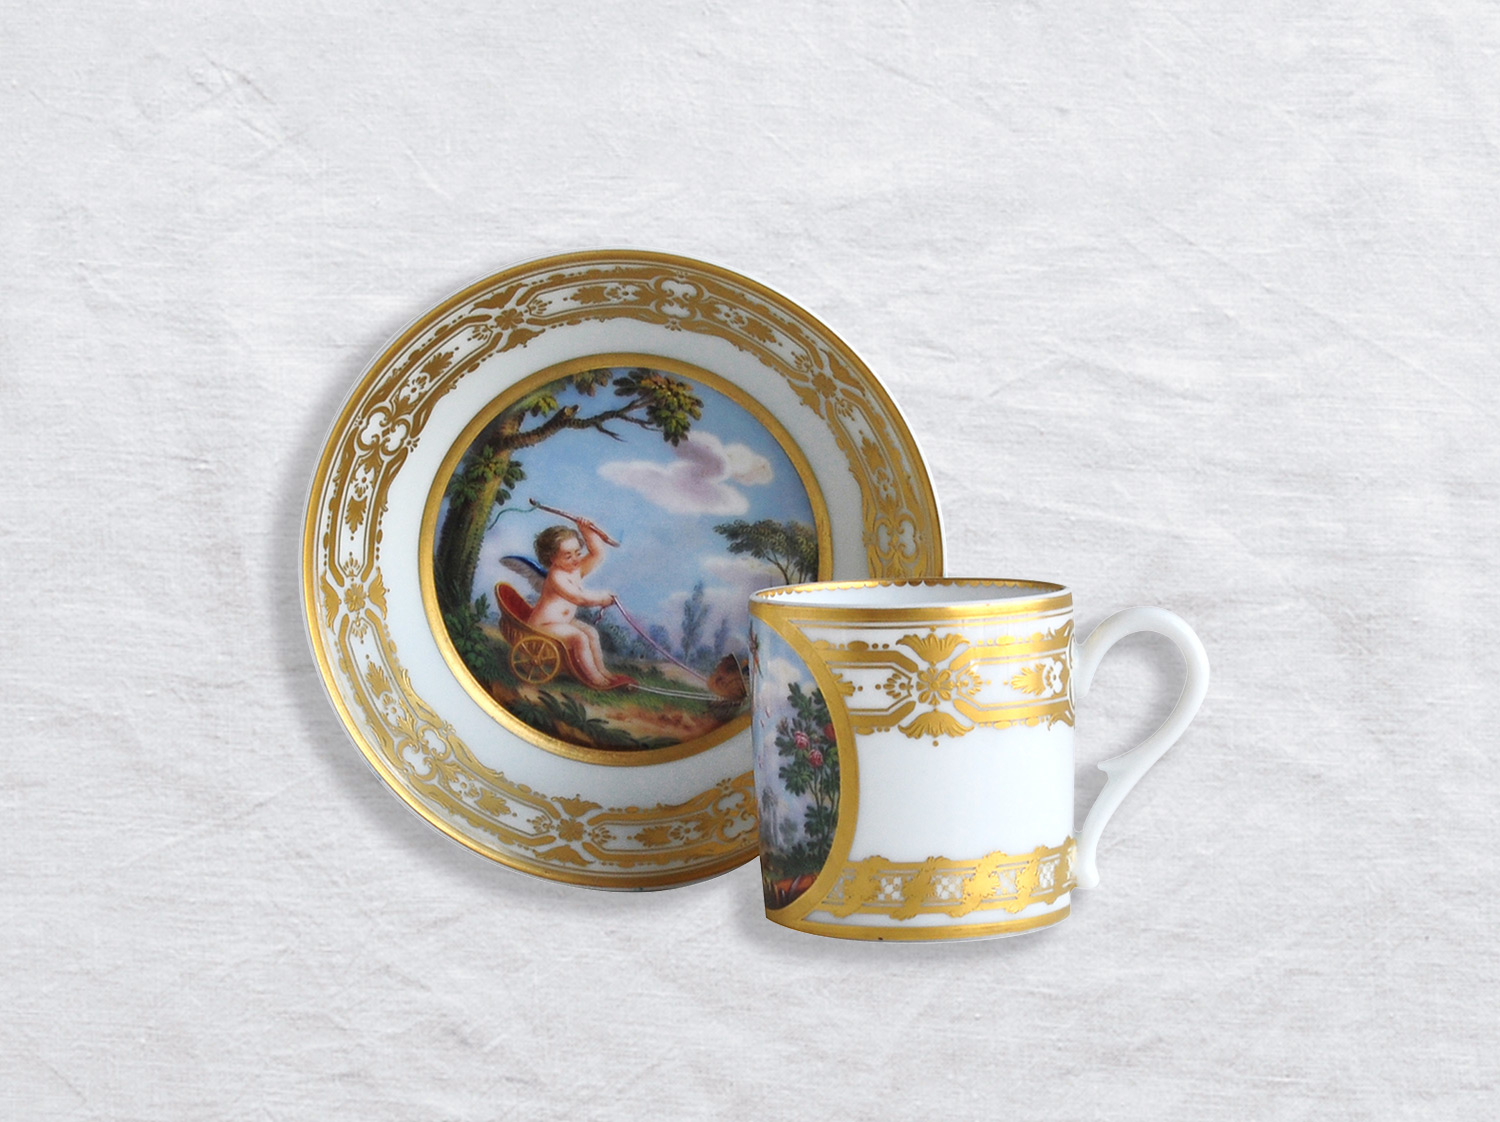 China Litron cup and saucer of the collection Venus corrigeant l amour | Bernardaud